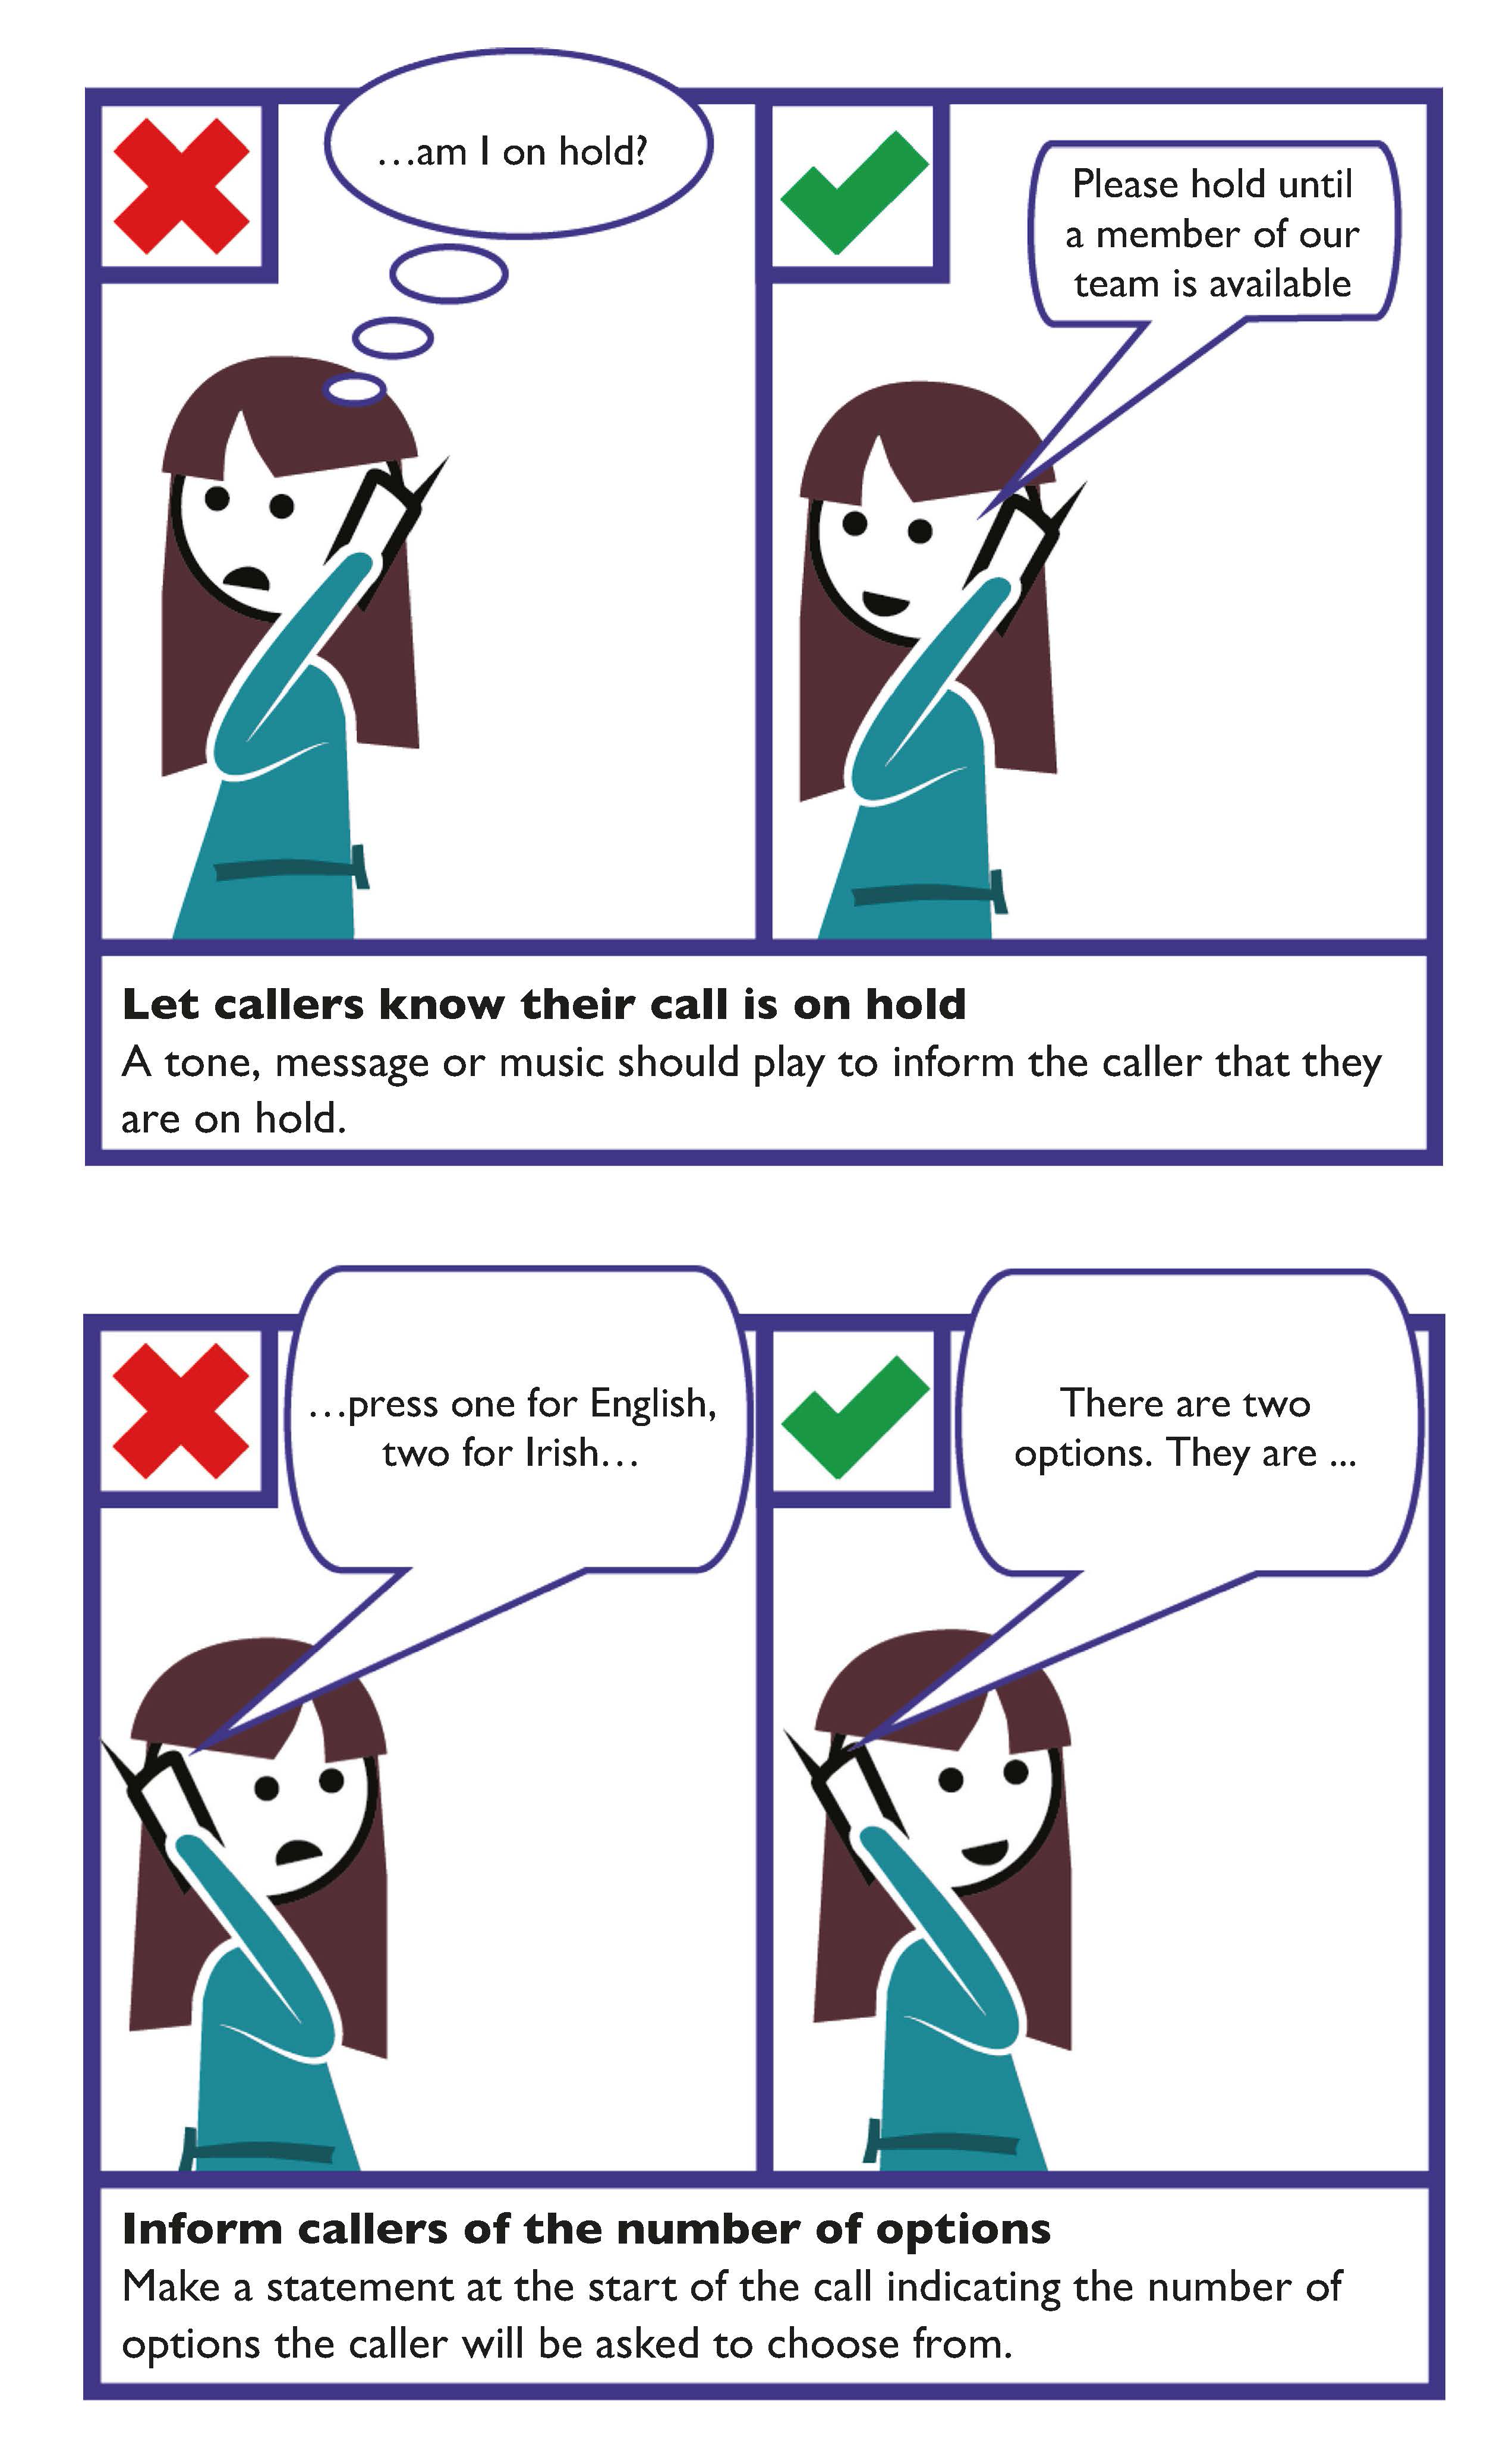 Telephone callers - informs callers of the number of options. Make a statement at the start on the call indicating the numbers of options the caller will be asked to choose from.